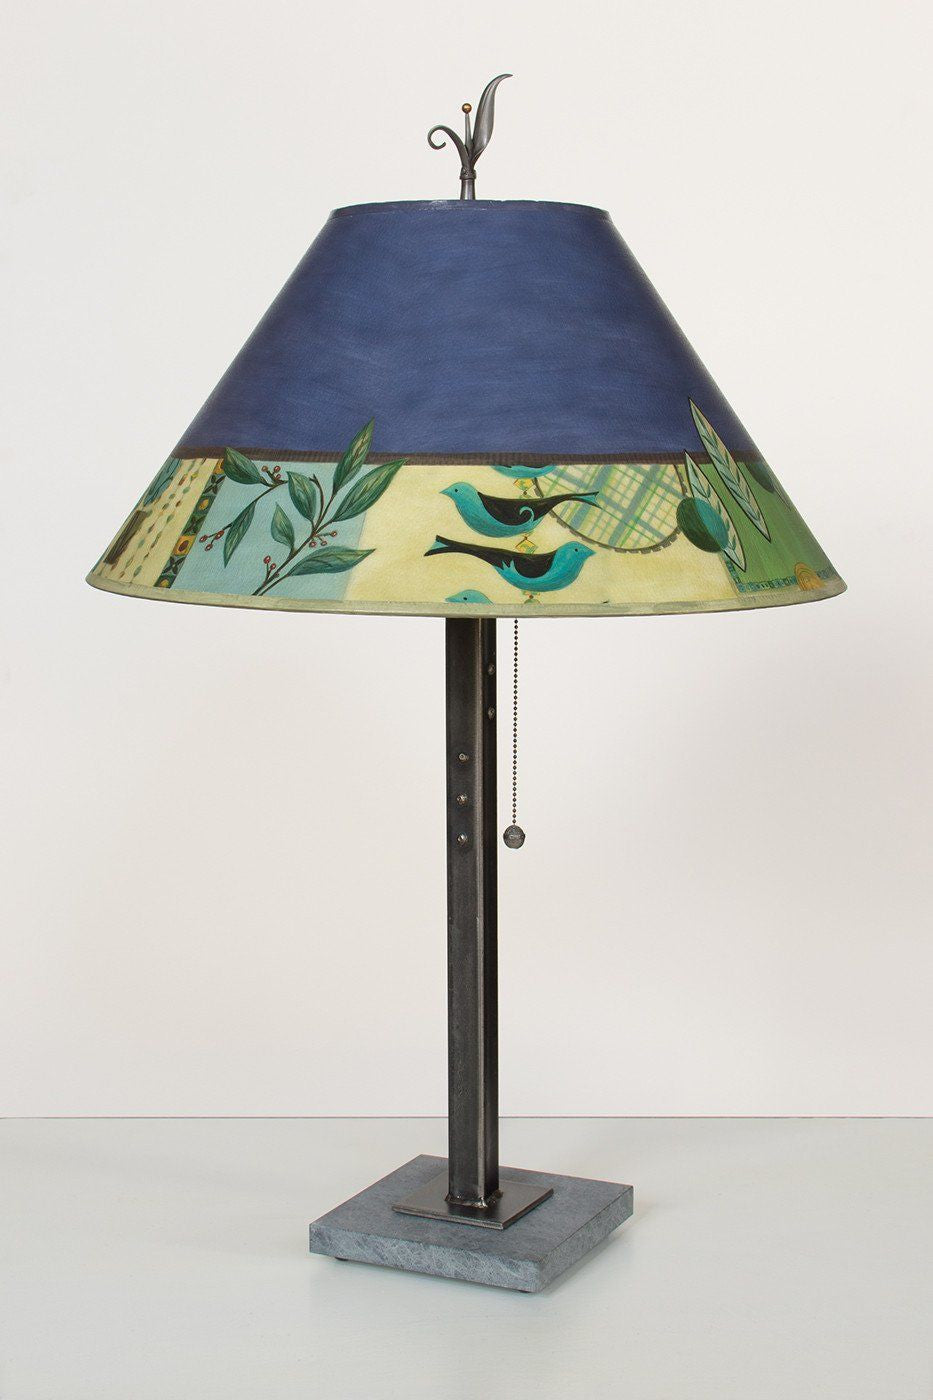 Janna Ugone & Co Table Lamps Steel Table Lamp Large Conical Shade in New Capri Periwinkle